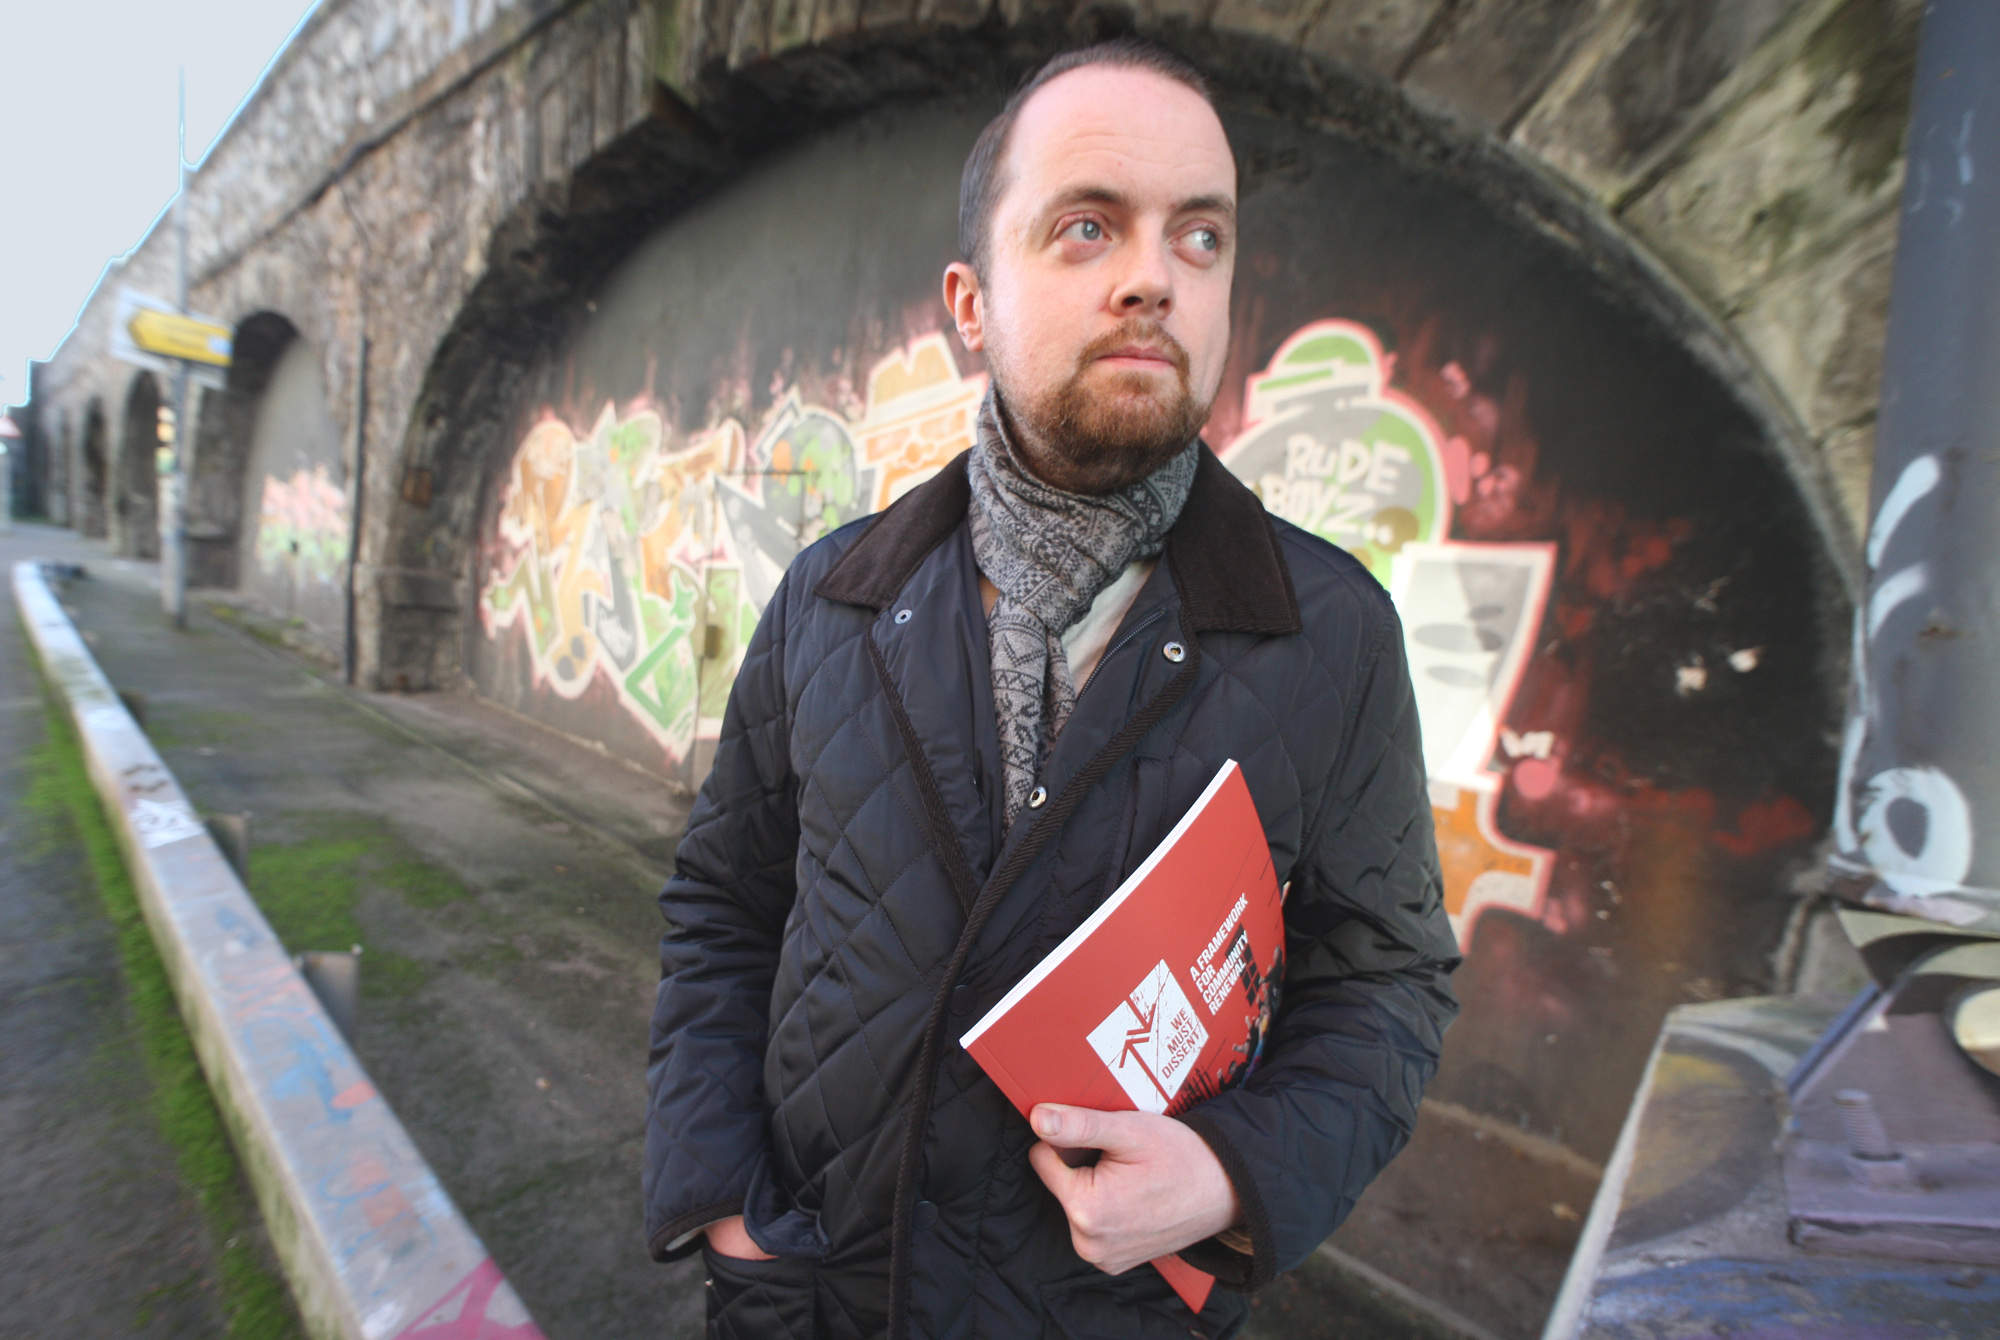 TUNNEL VISION: Fionntán Hargey of the Market Development Association